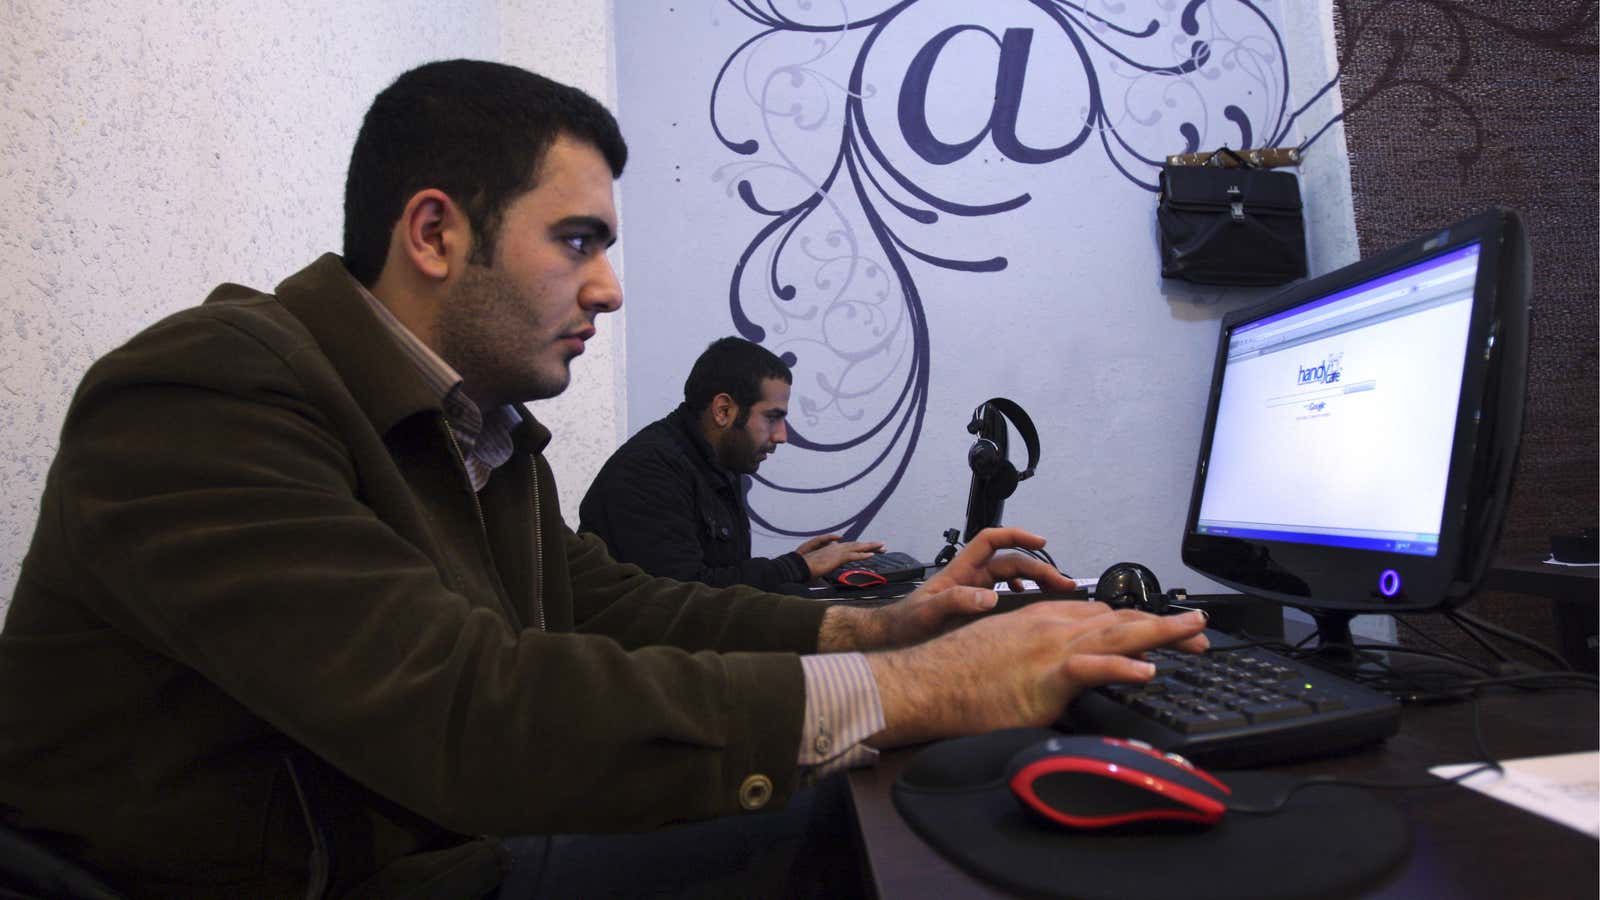 An Iranian student in Tehran accessing Google’s search service in 2011.